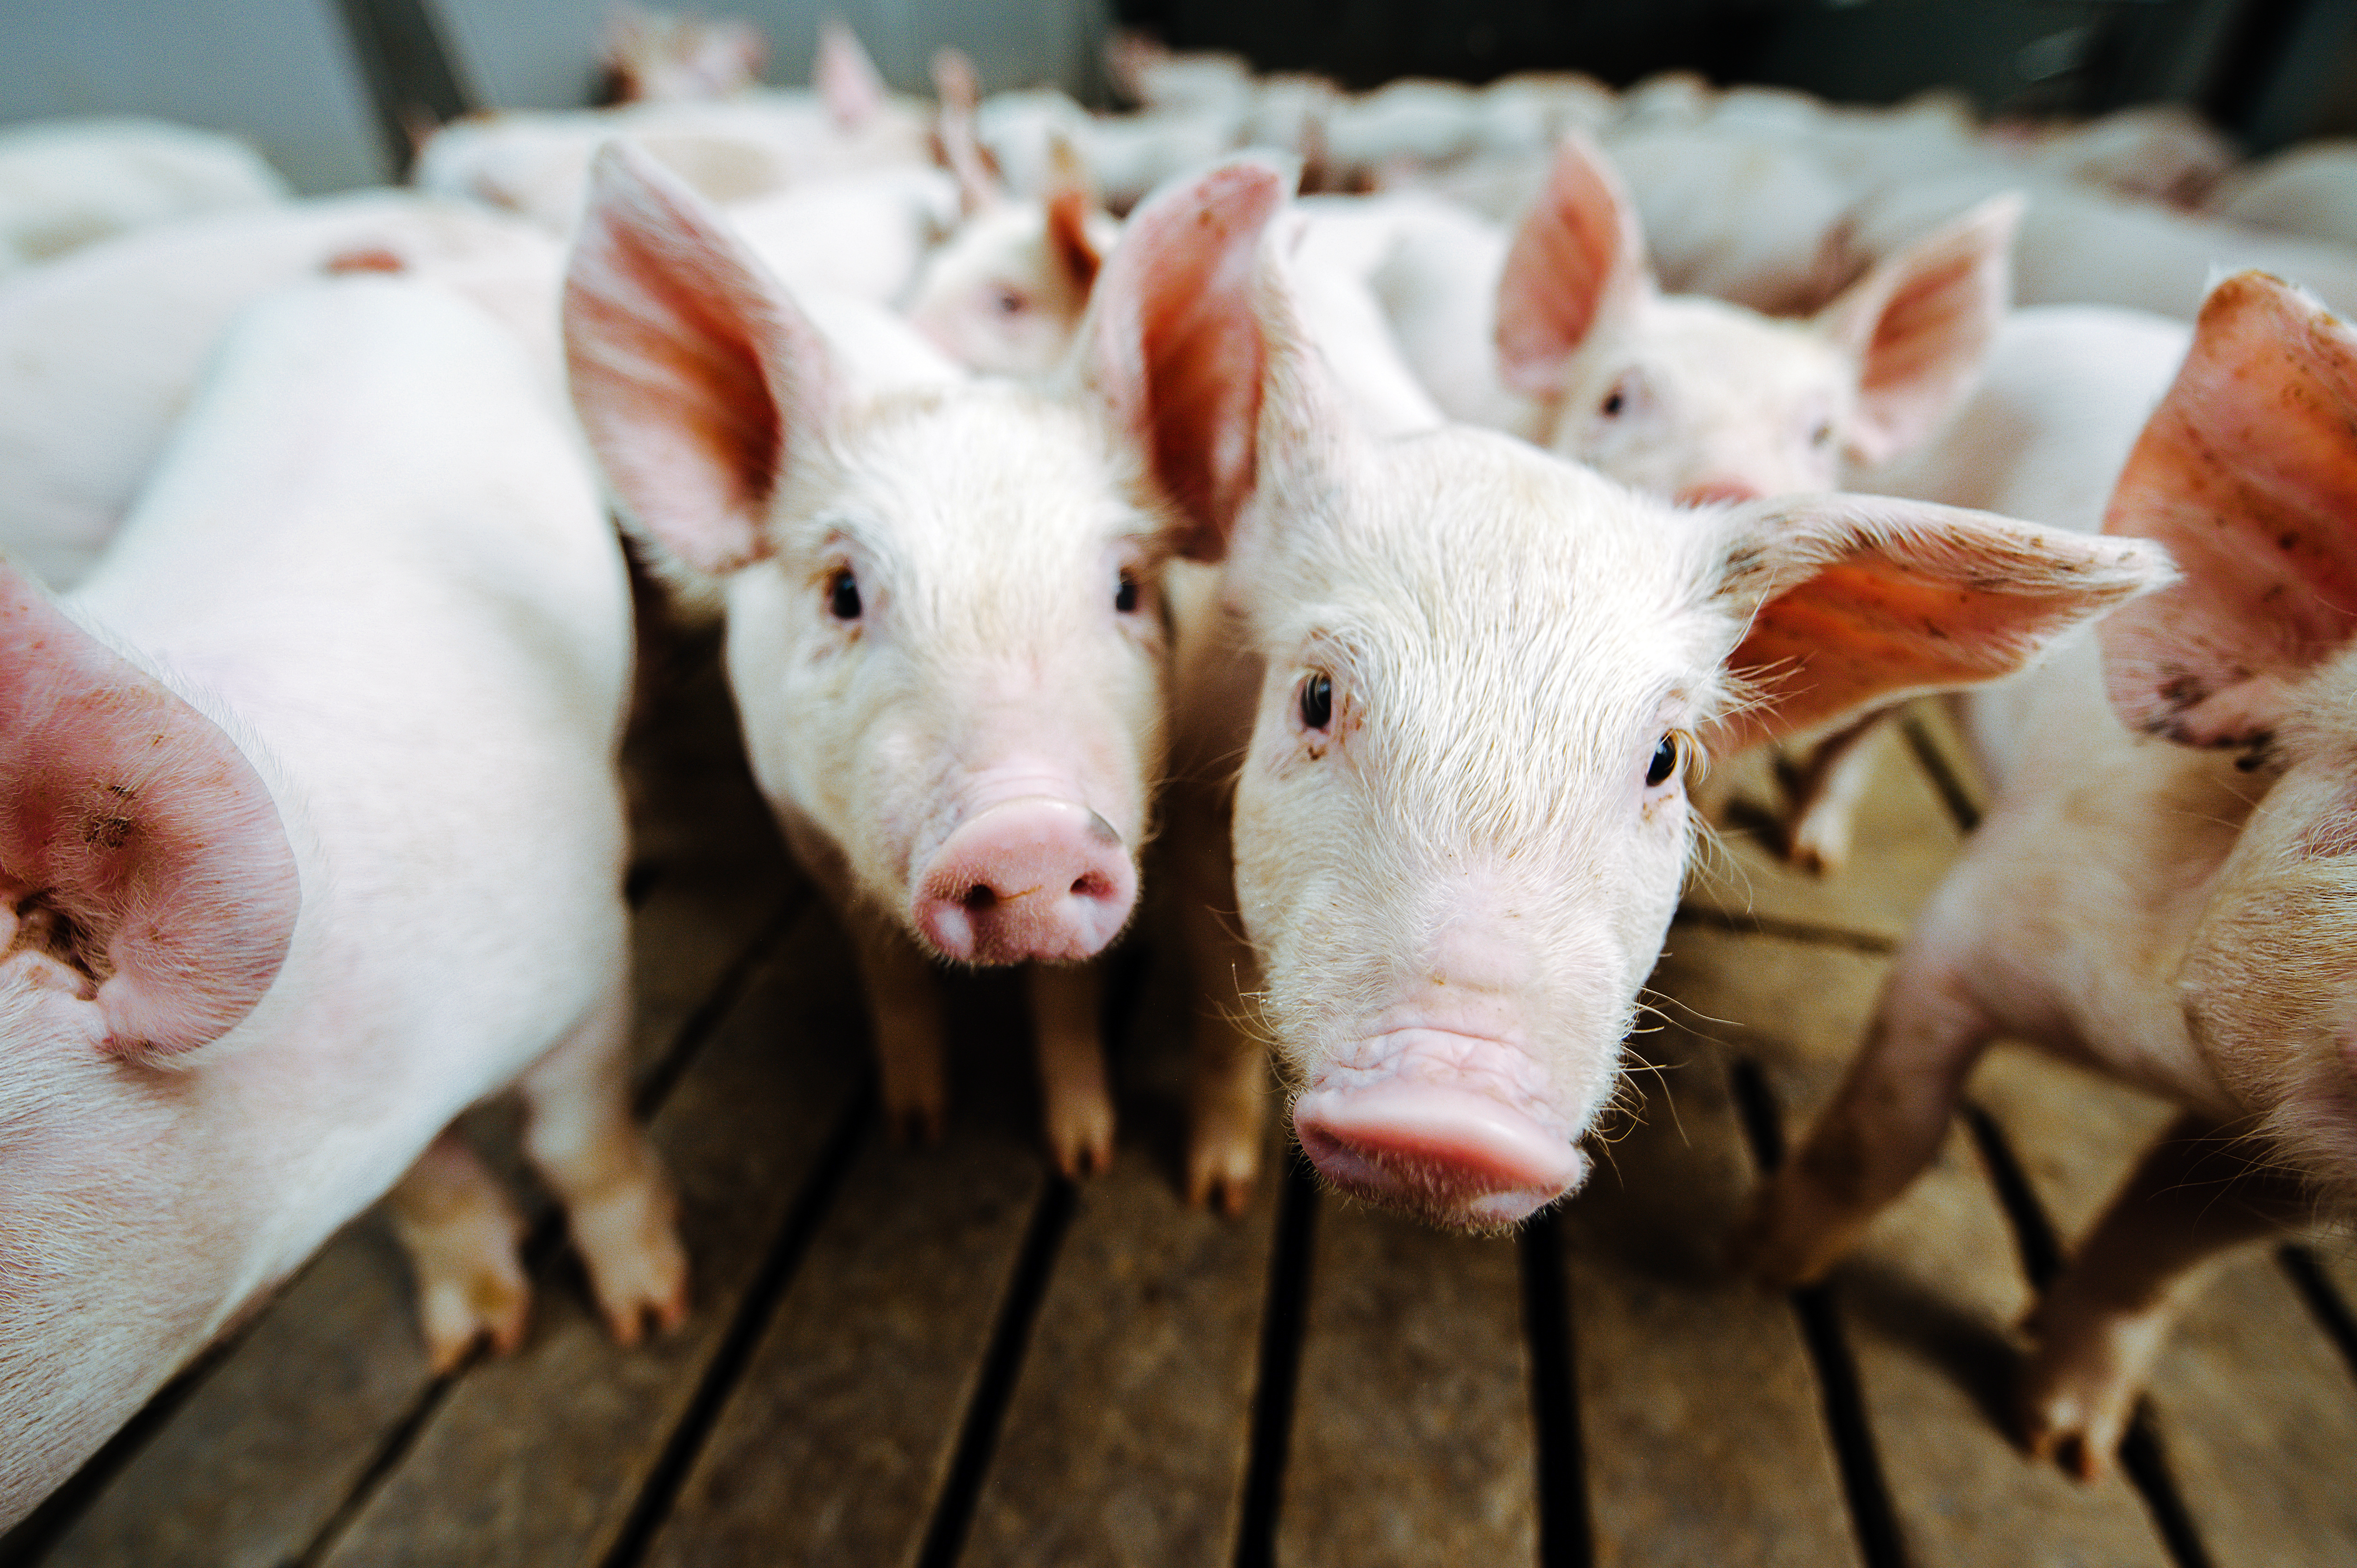 Small pigs gathered together looking at the camera. Photo from Adobe Stock.